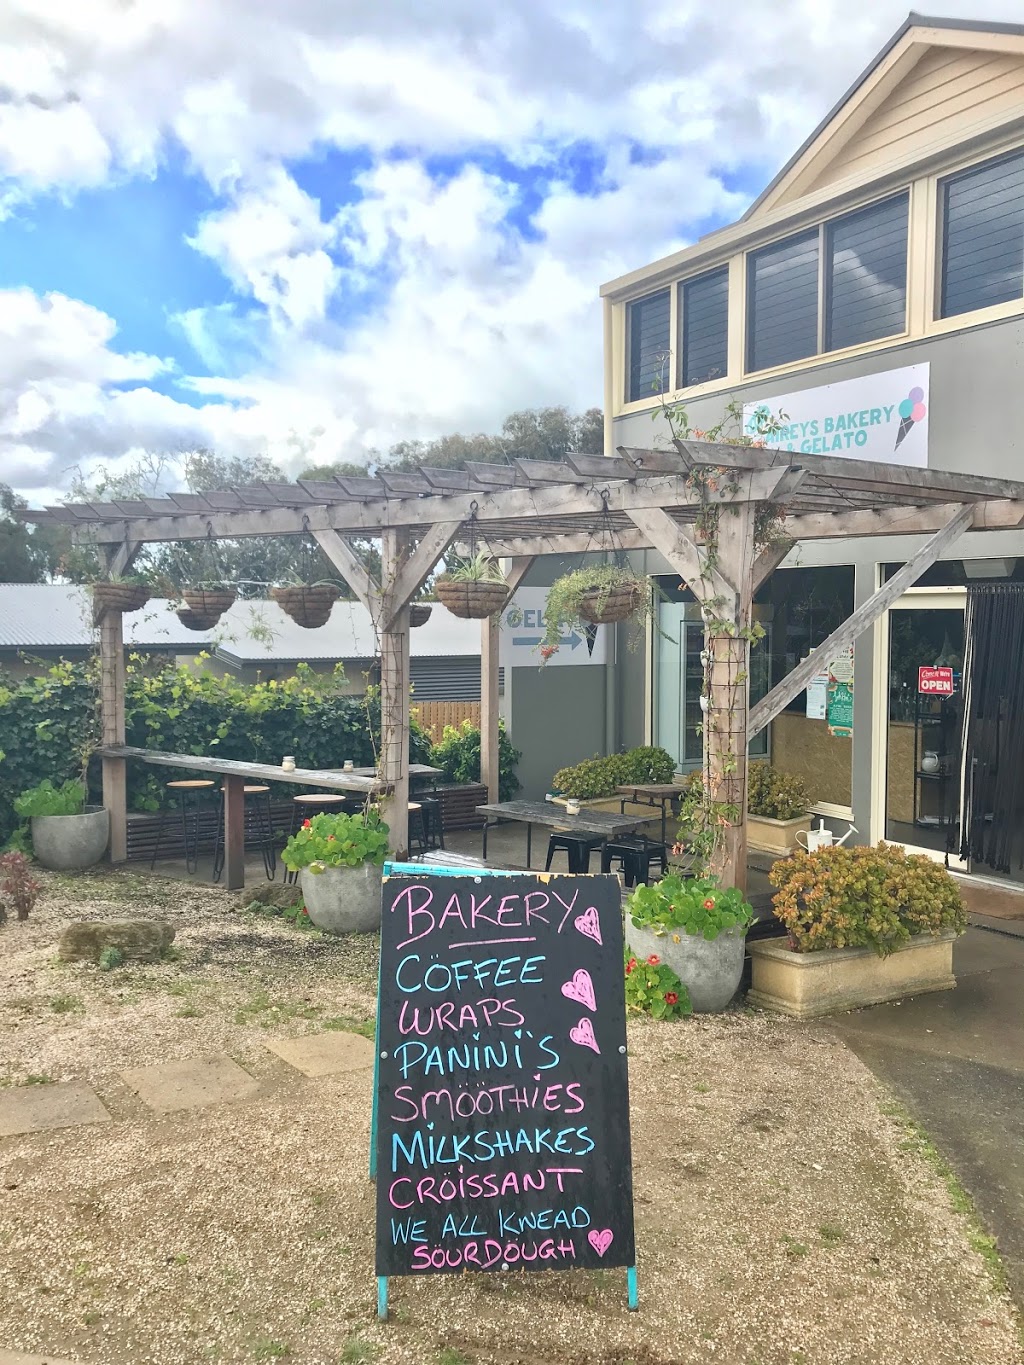 Aireys Bakery and Gelato | bakery | 26 Great Ocean Rd, Aireys Inlet VIC 3231, Australia | 0428379790 OR +61 428 379 790